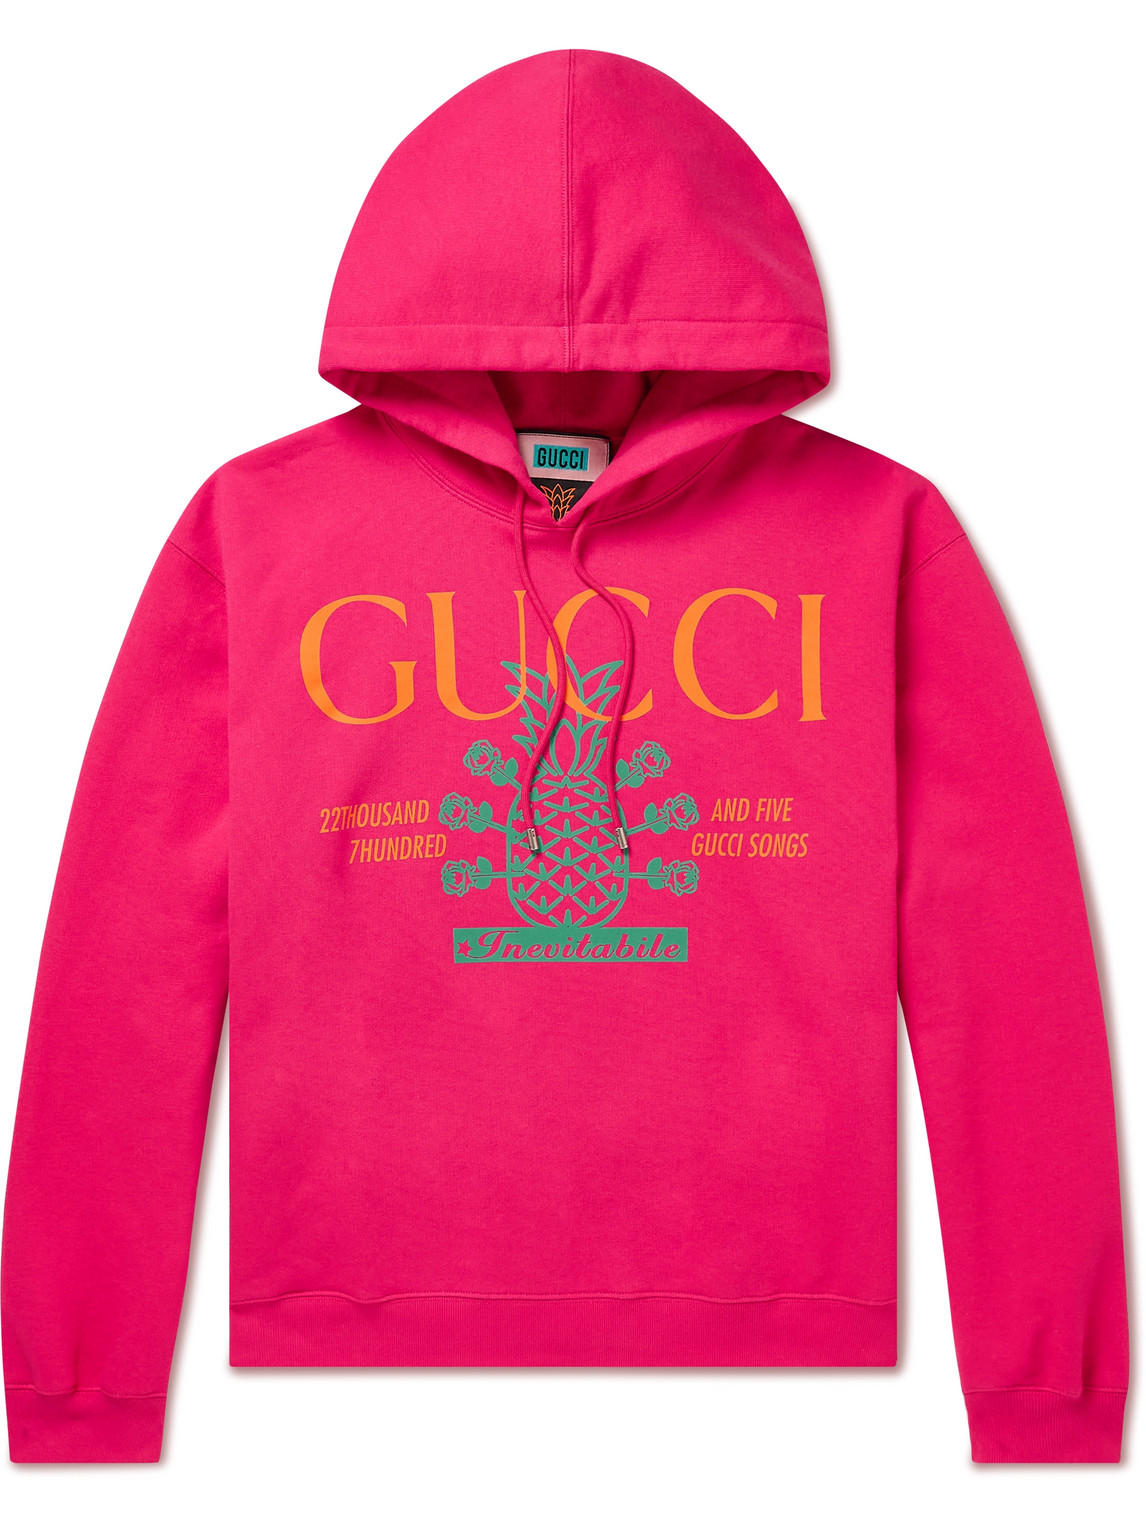 GUCCI - Logo-Print Cotton-Jersey Hoodie - Men - Red - S for Men